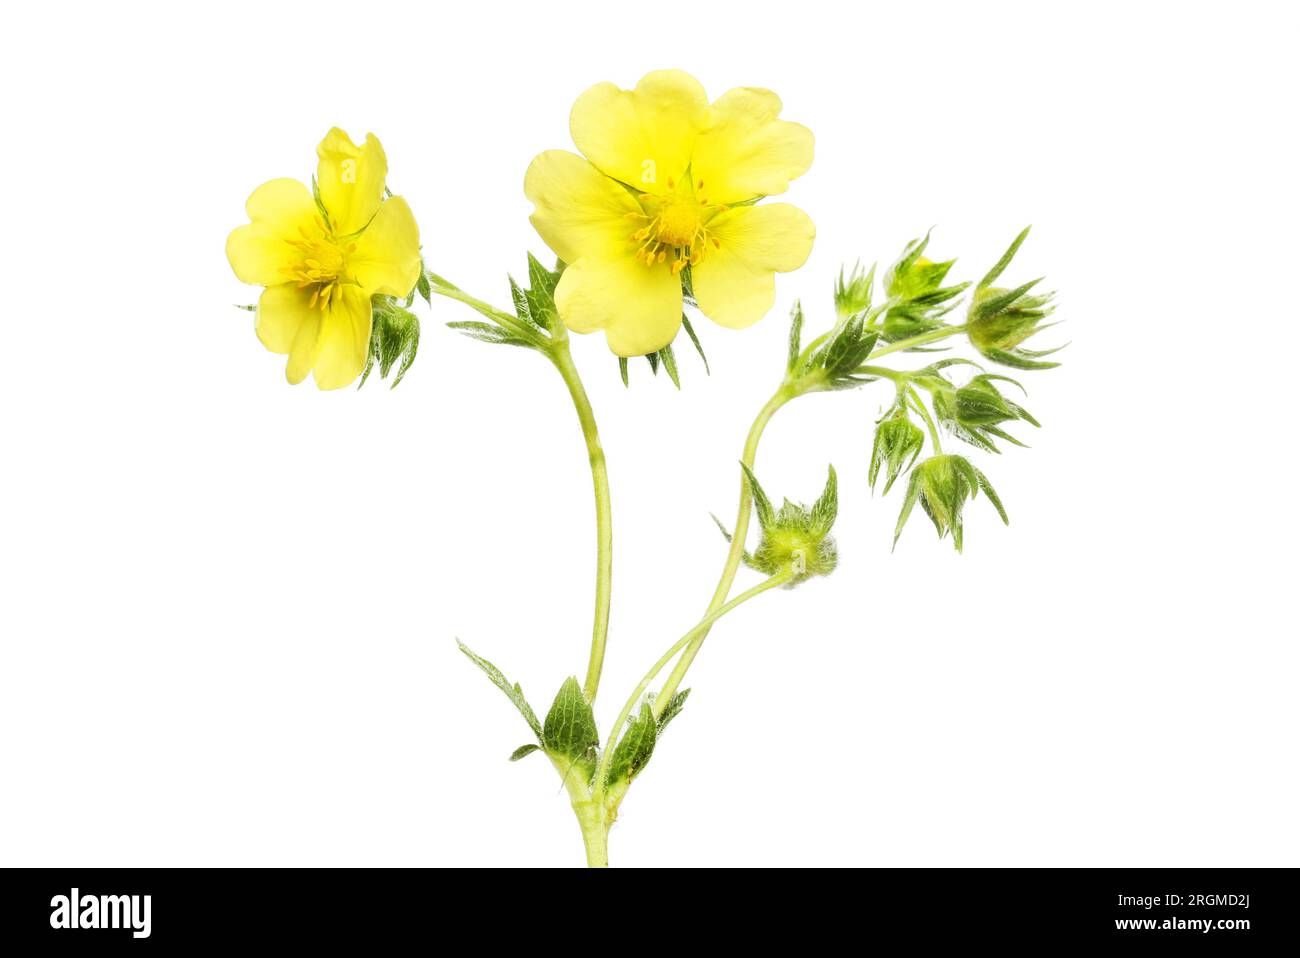 Yellow potentilla flowers and buds isolated against white Stock Photo